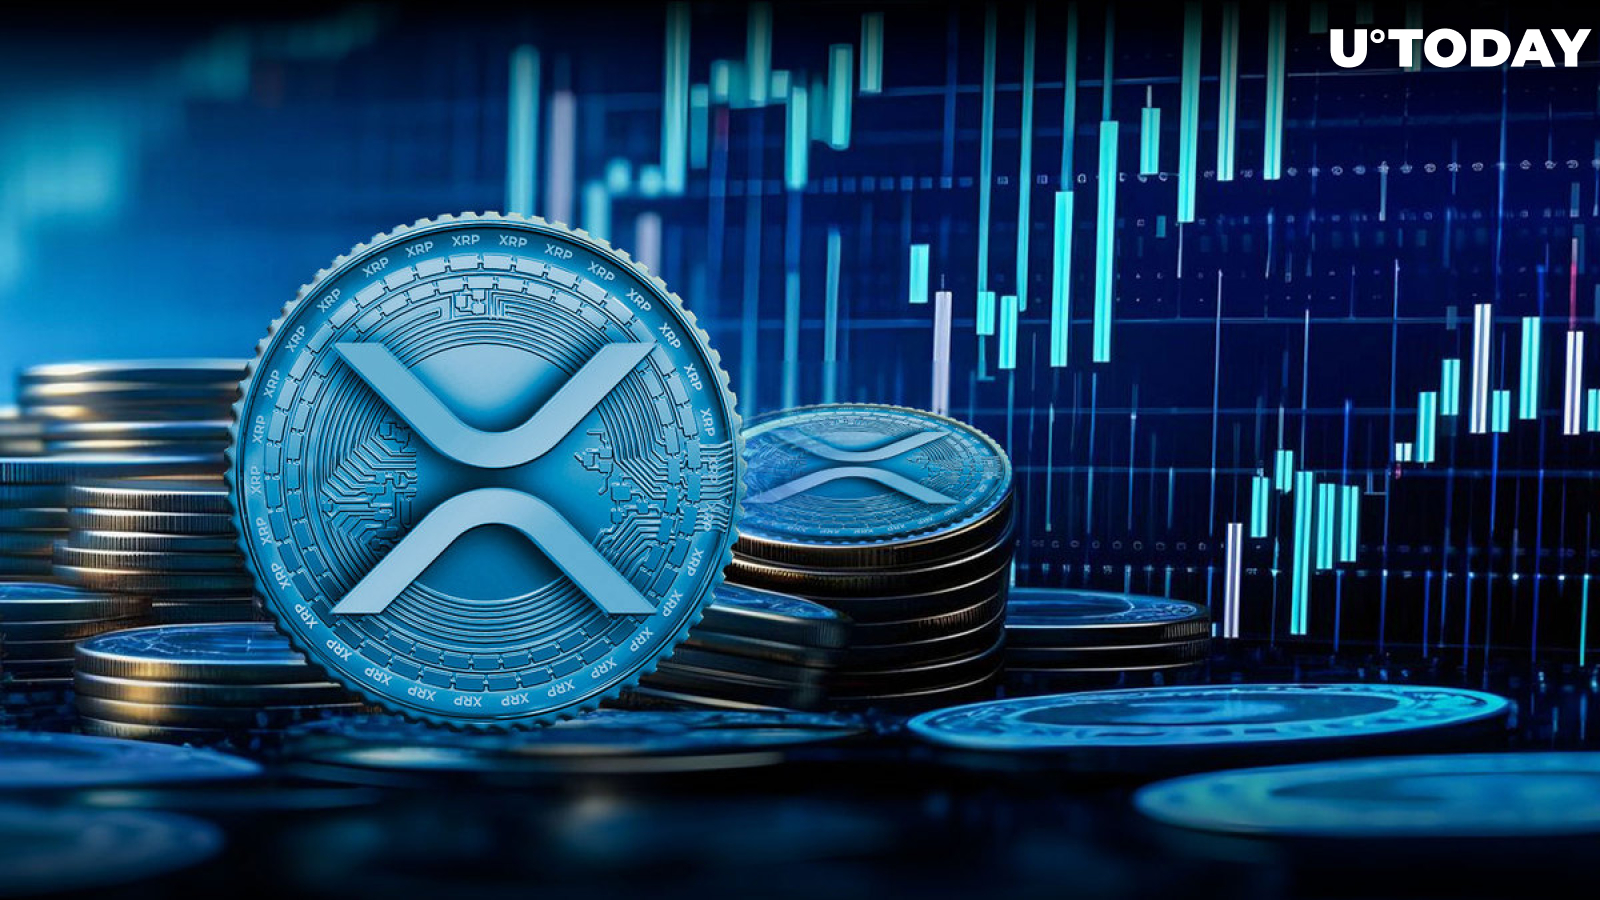 XRP Price May See Upswing to $0.66: Analyst